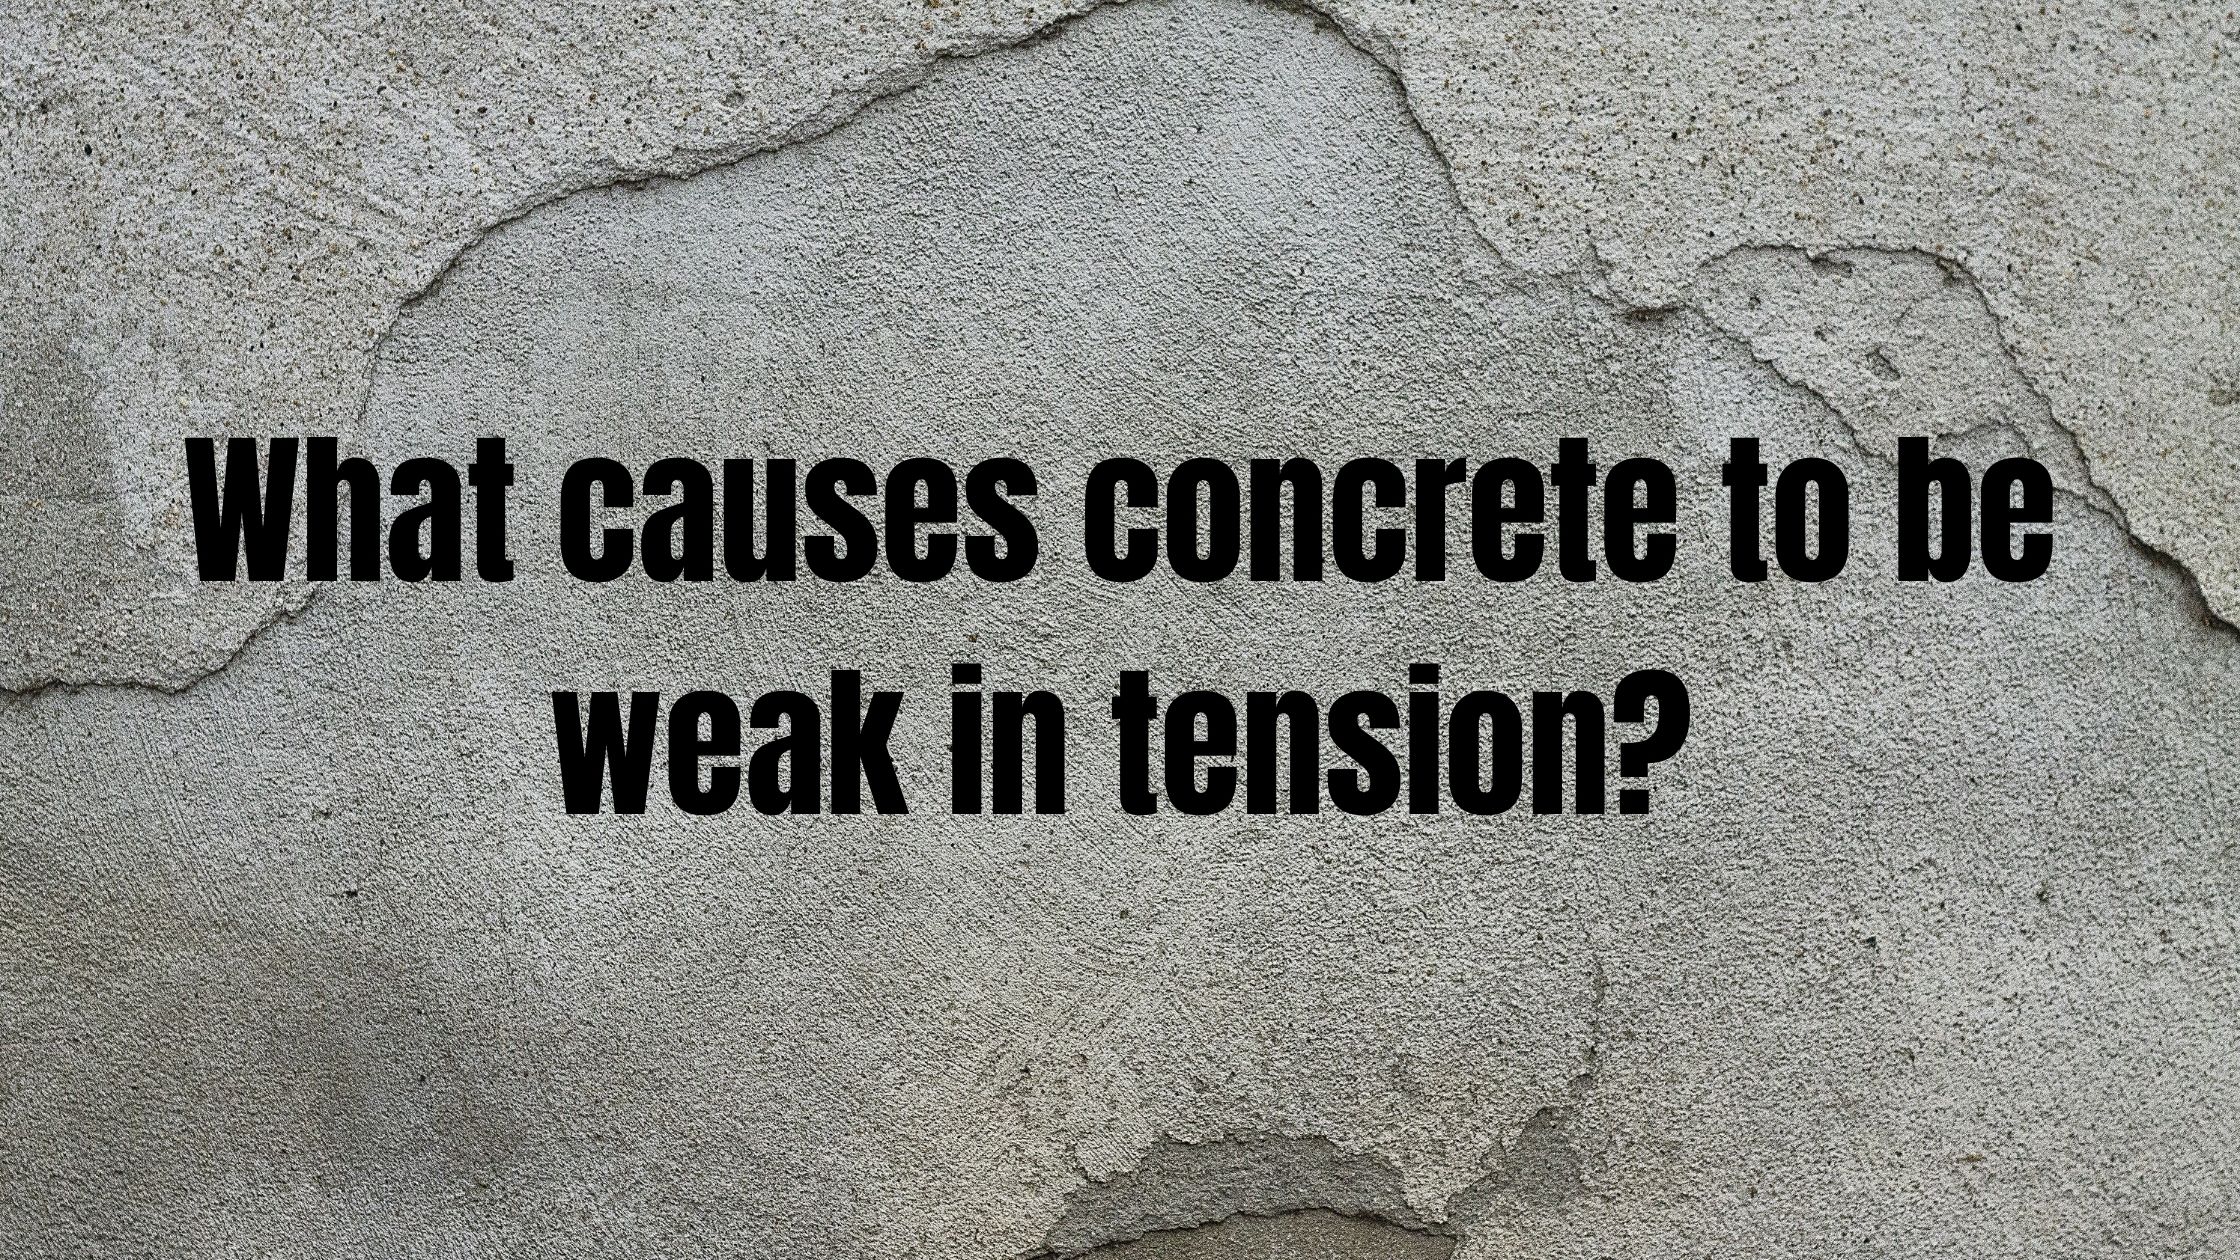 What causes concrete to be weak in tension